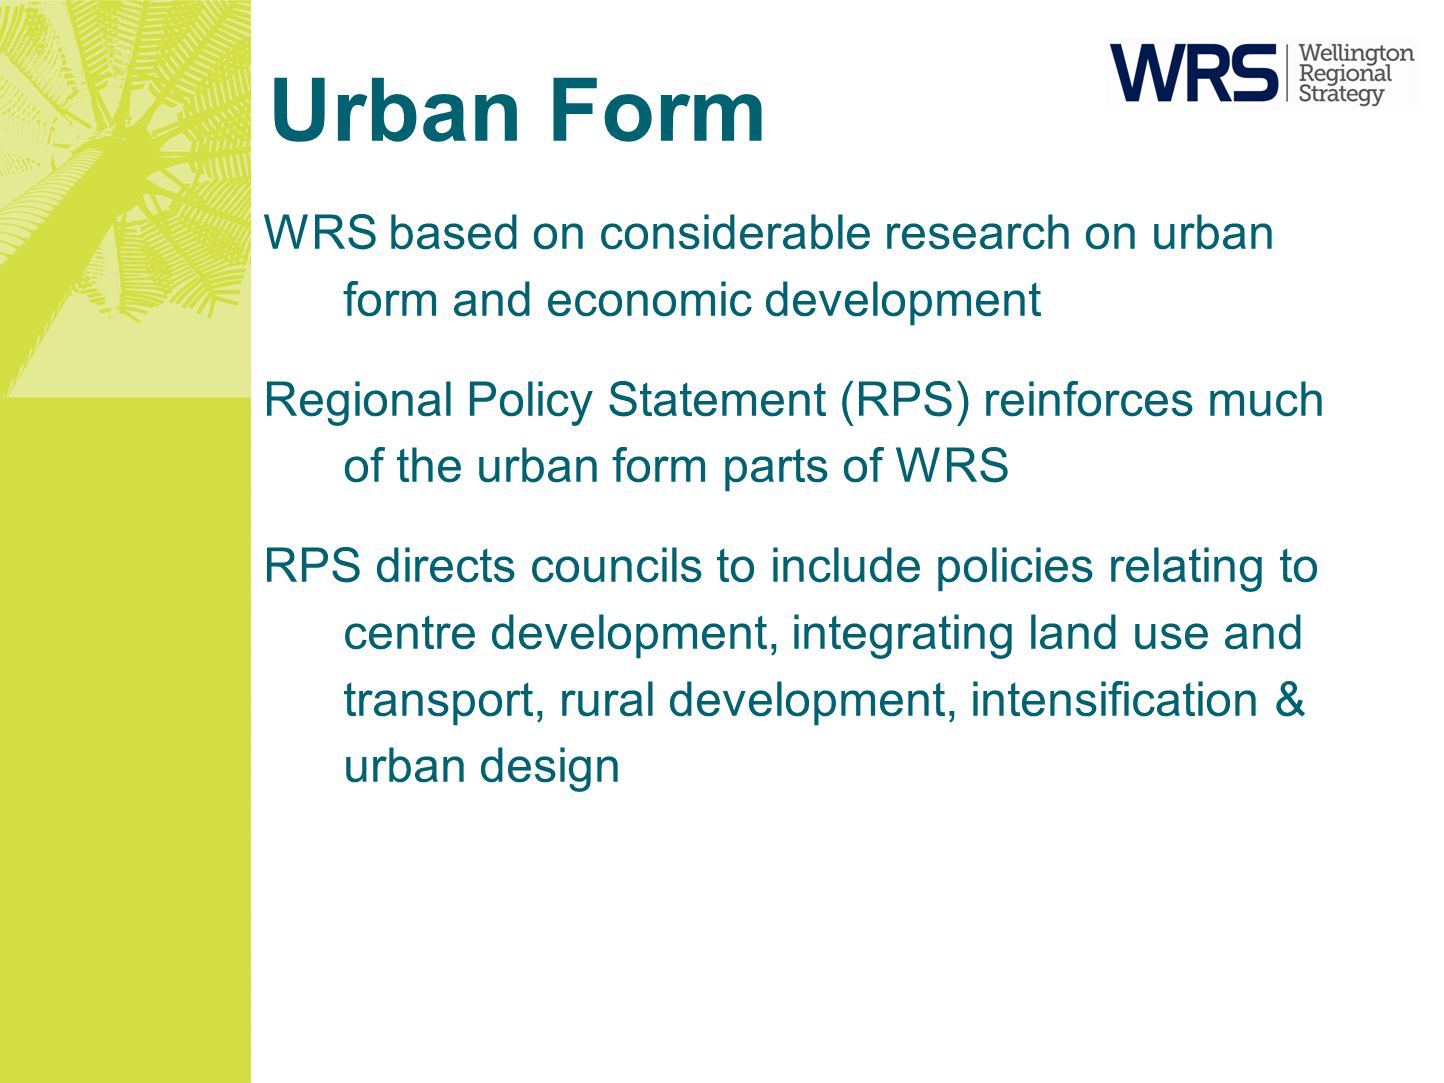 Urban Form WRS based on considerable research on urban form and economic development Regional Policy Statement (RPS) reinforces much of the urban form parts of WRS RPS directs councils to include policies relating to centre development, integrating land use and transport, rural development, intensification & urban design